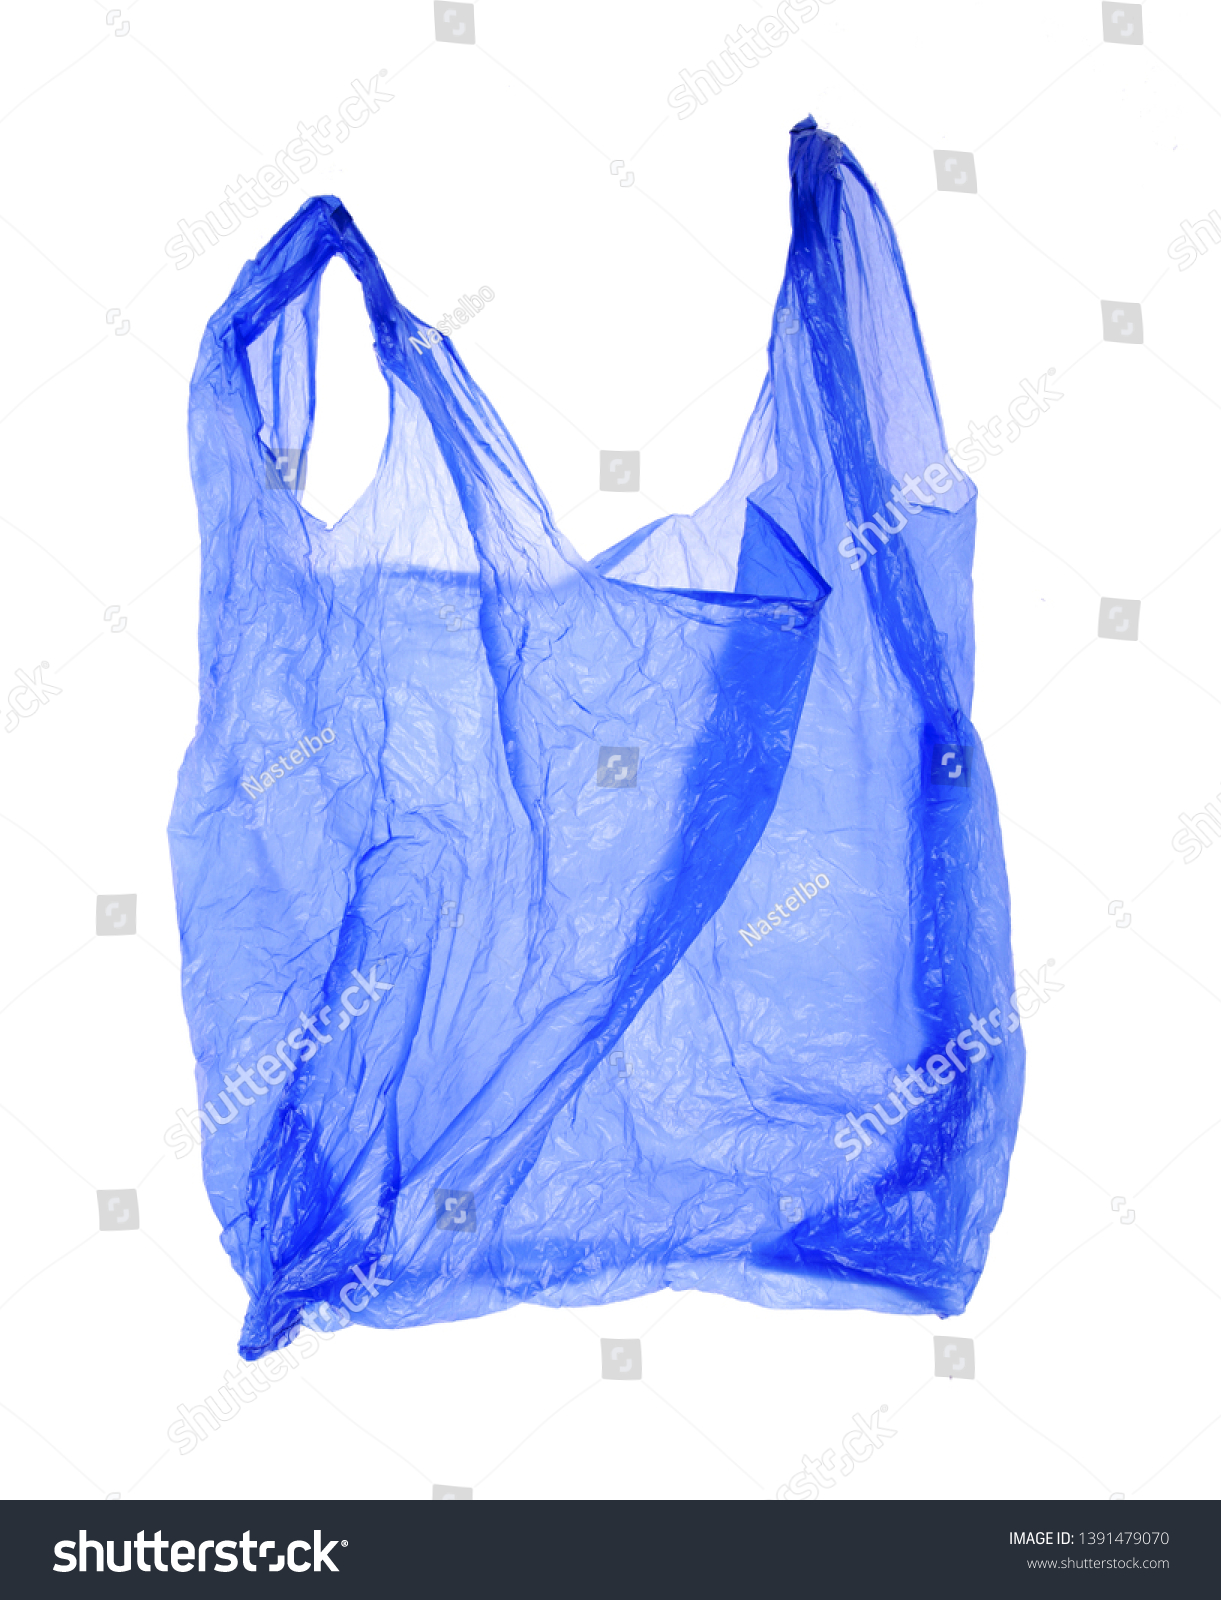 Blue plastic bag on white background. Isolated object #1391479070